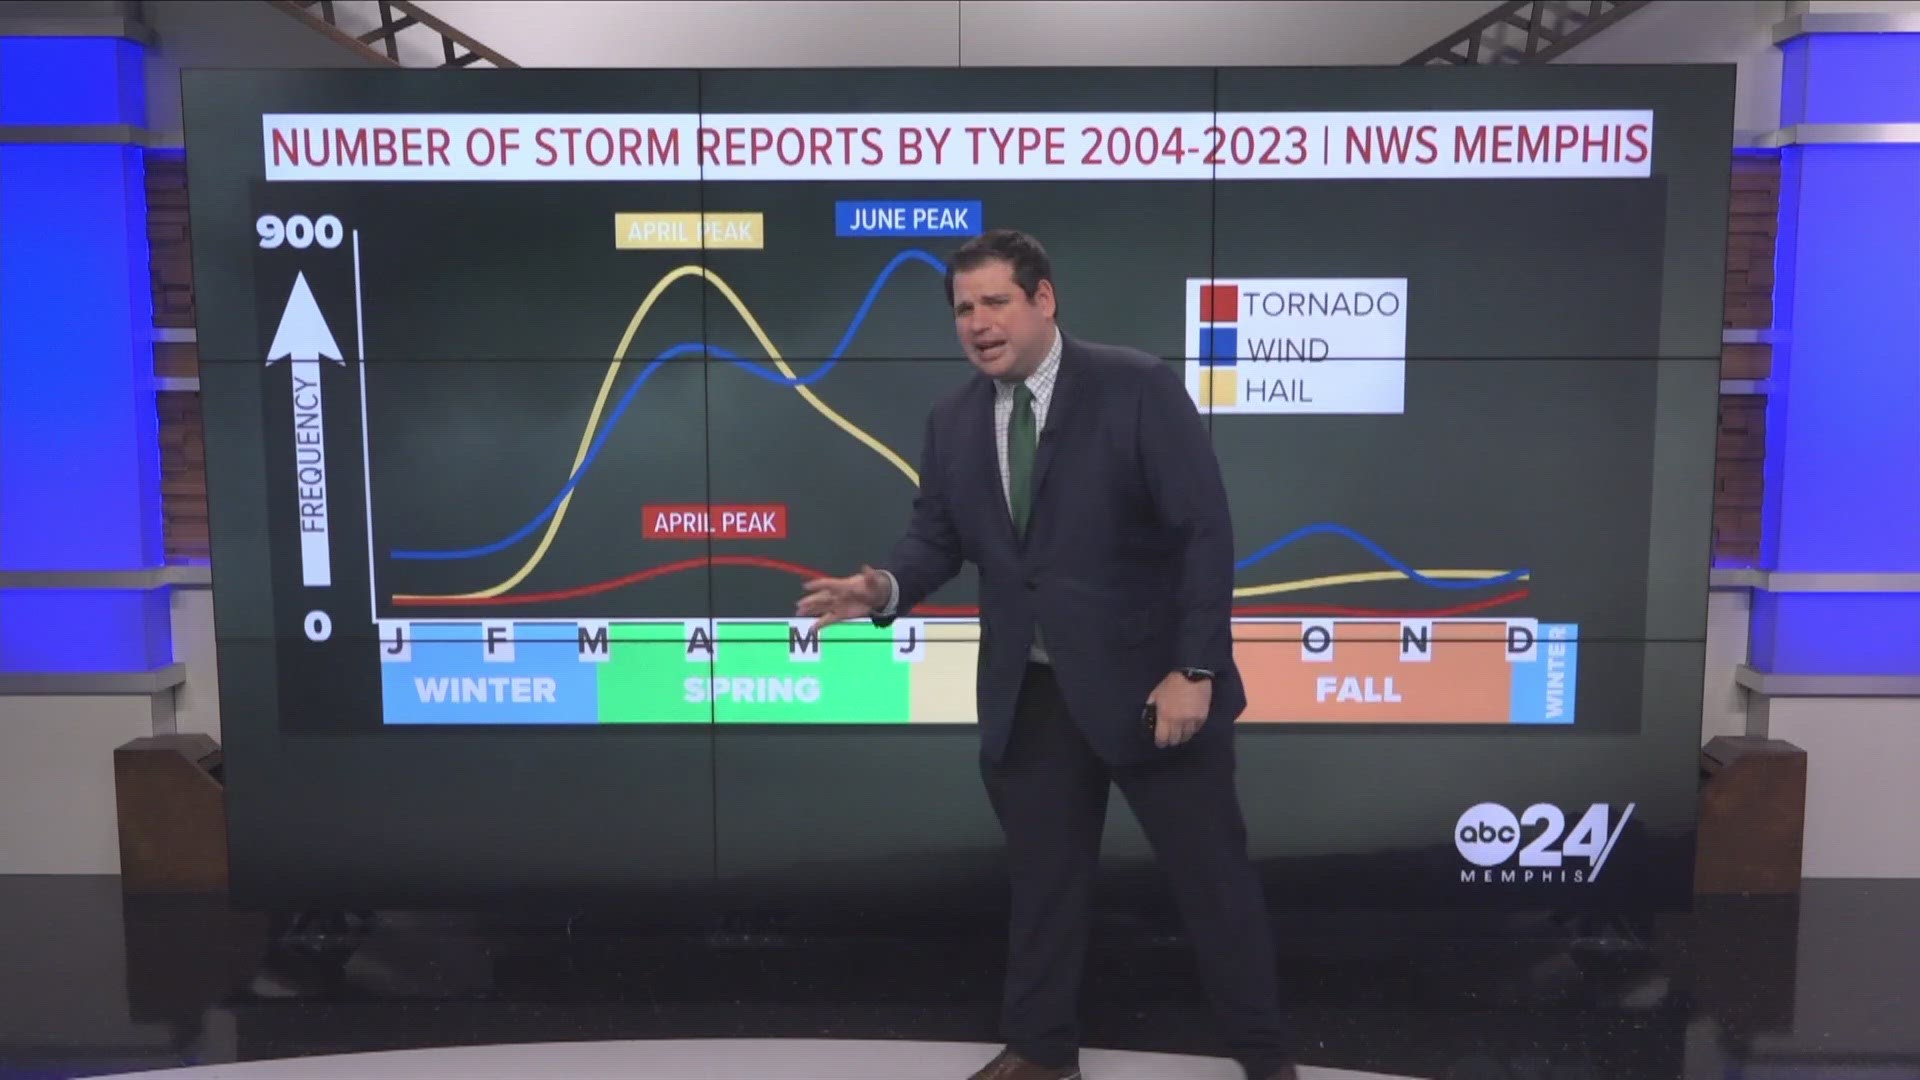 Spring and Summer feature the most severe weather of all the seasons in the Mid-South.